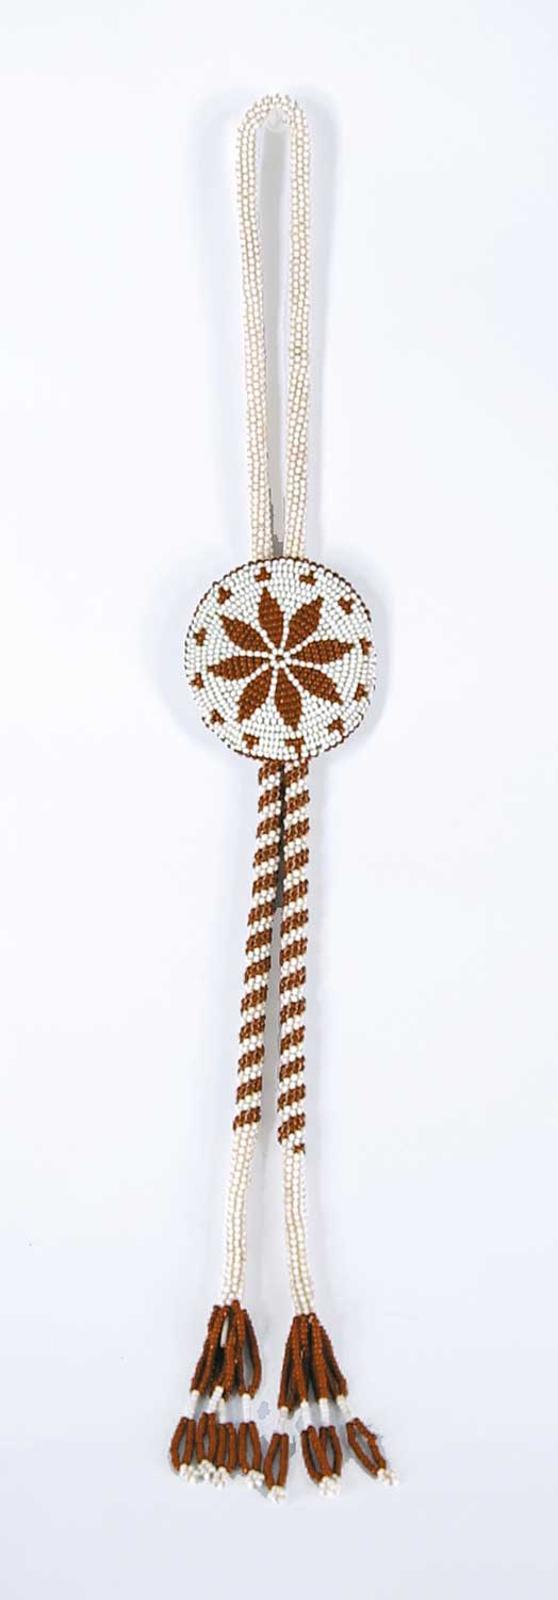 Robert Charles Aller (1922-2008) - Untitled - Brown and White Beaded Necklace with Leather and Bead Bolo